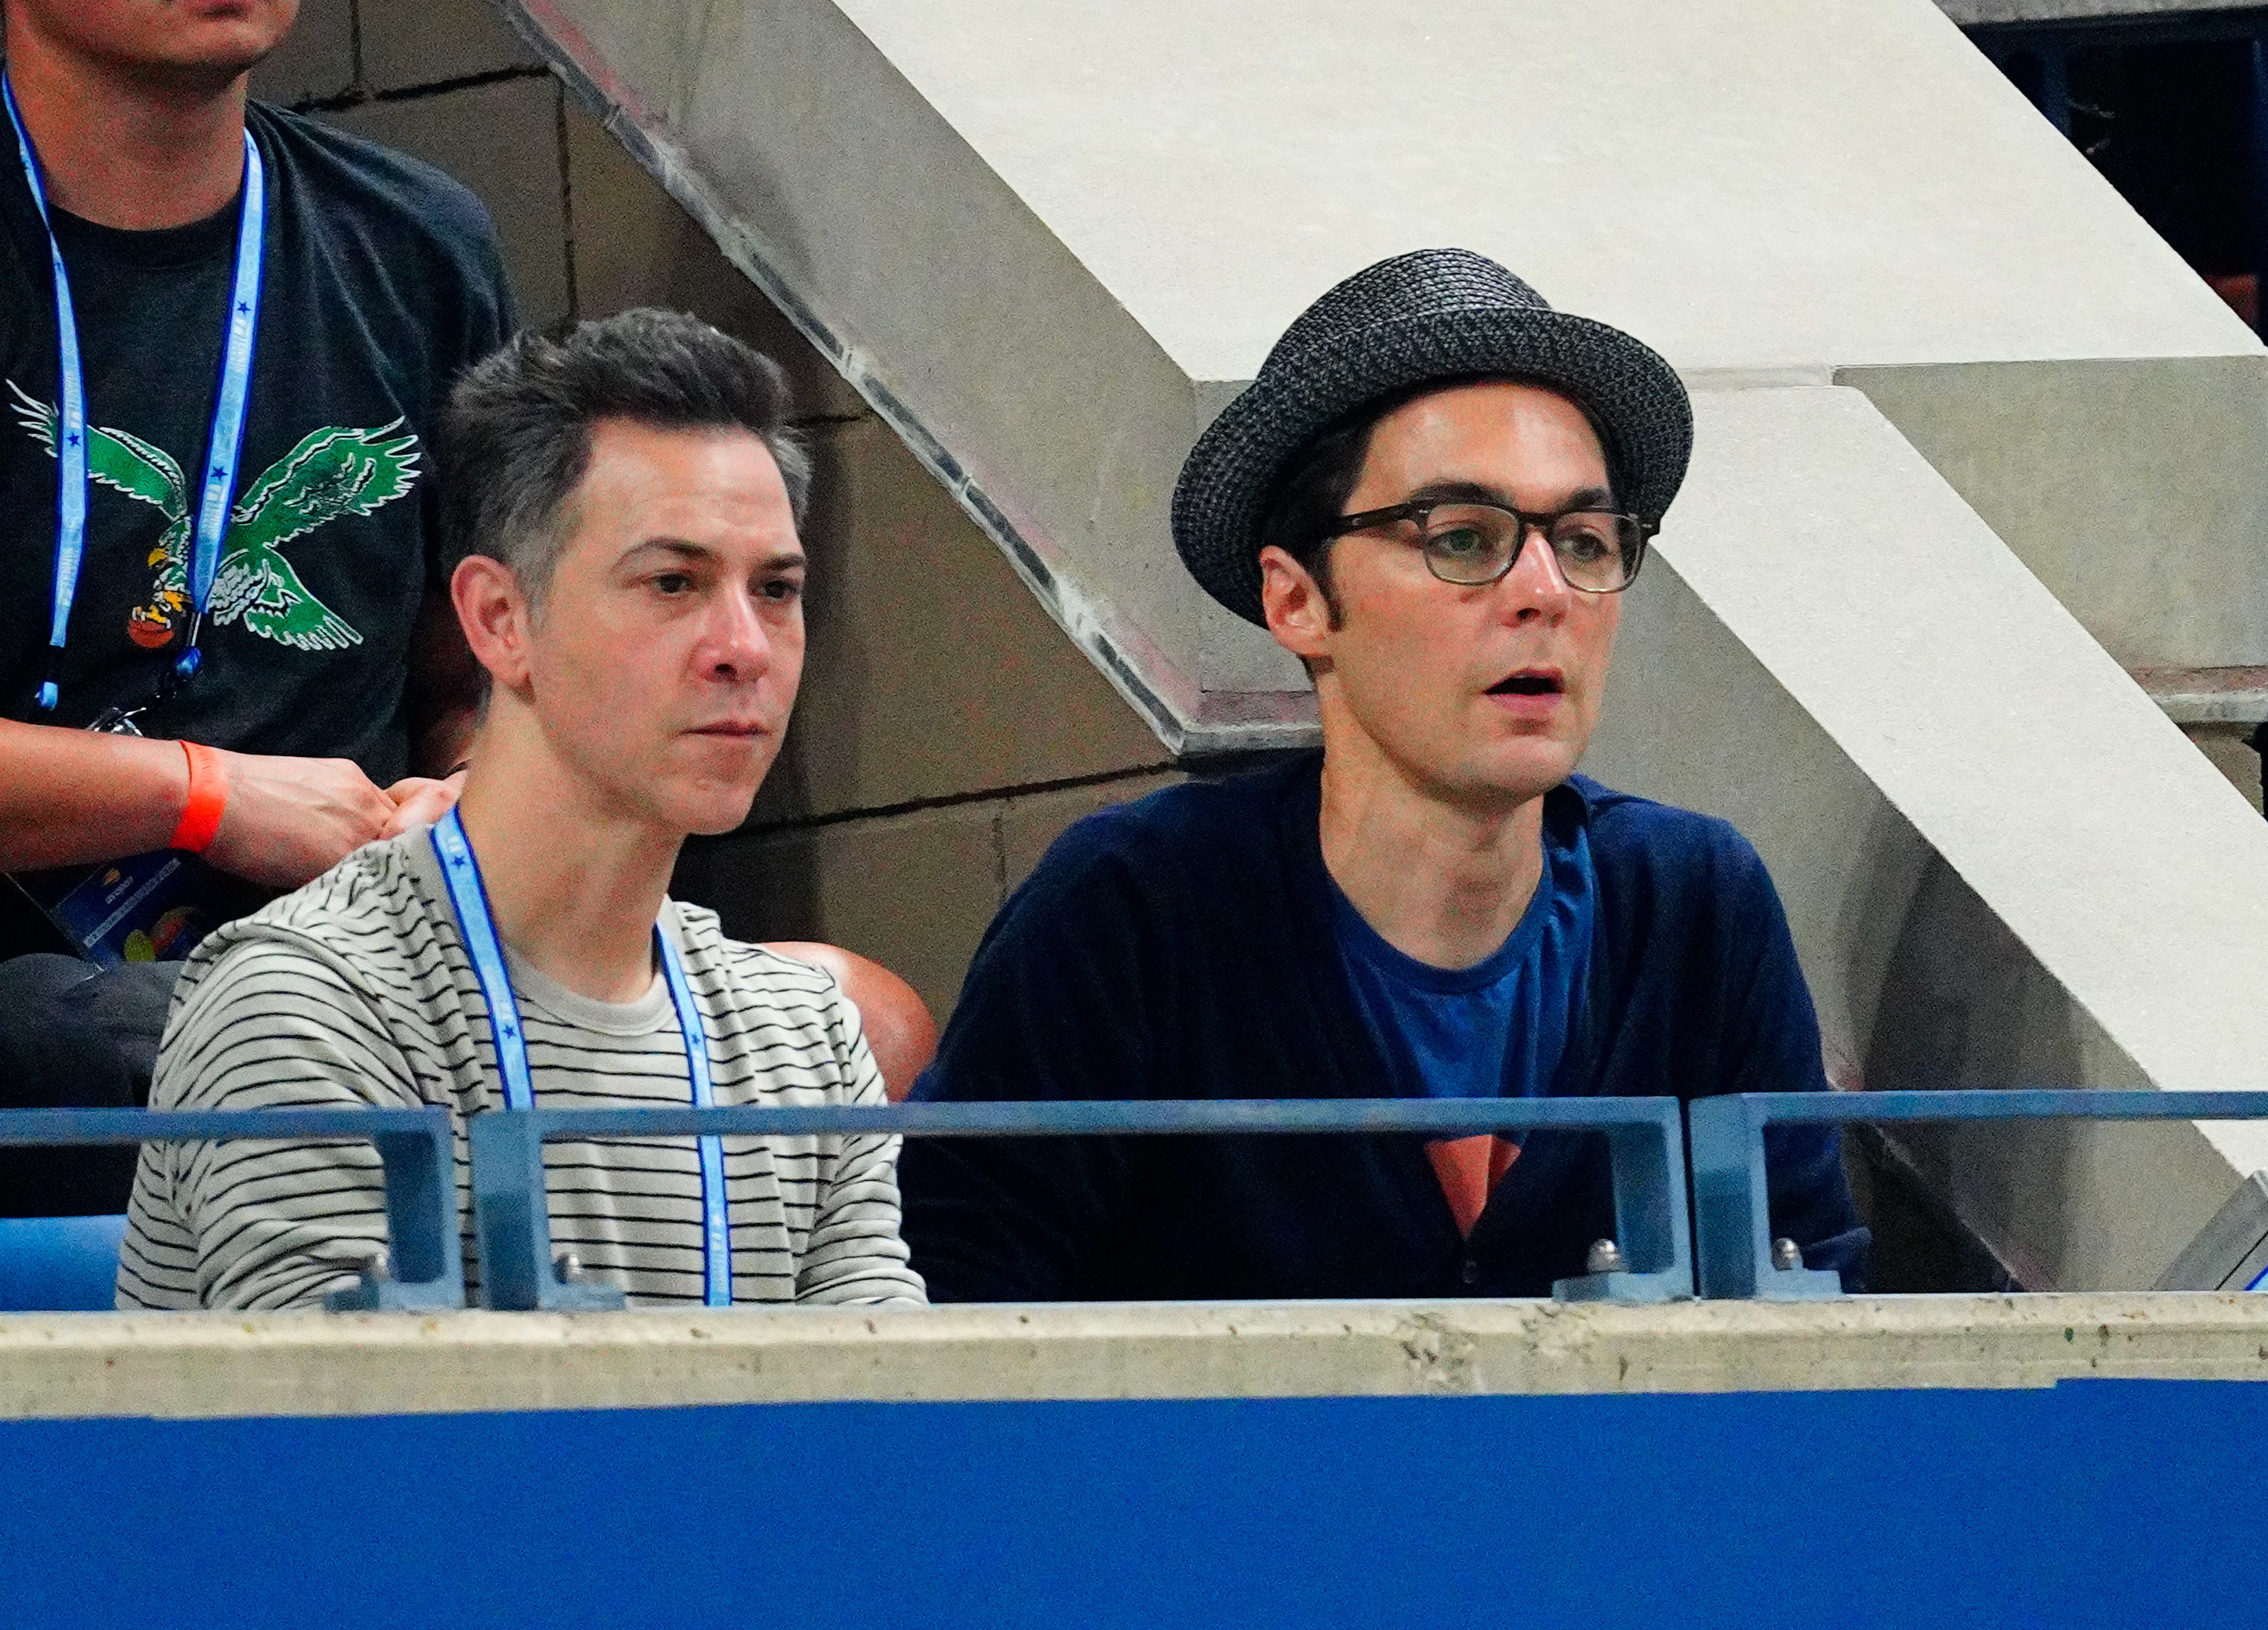 the two in the stadium watching a game